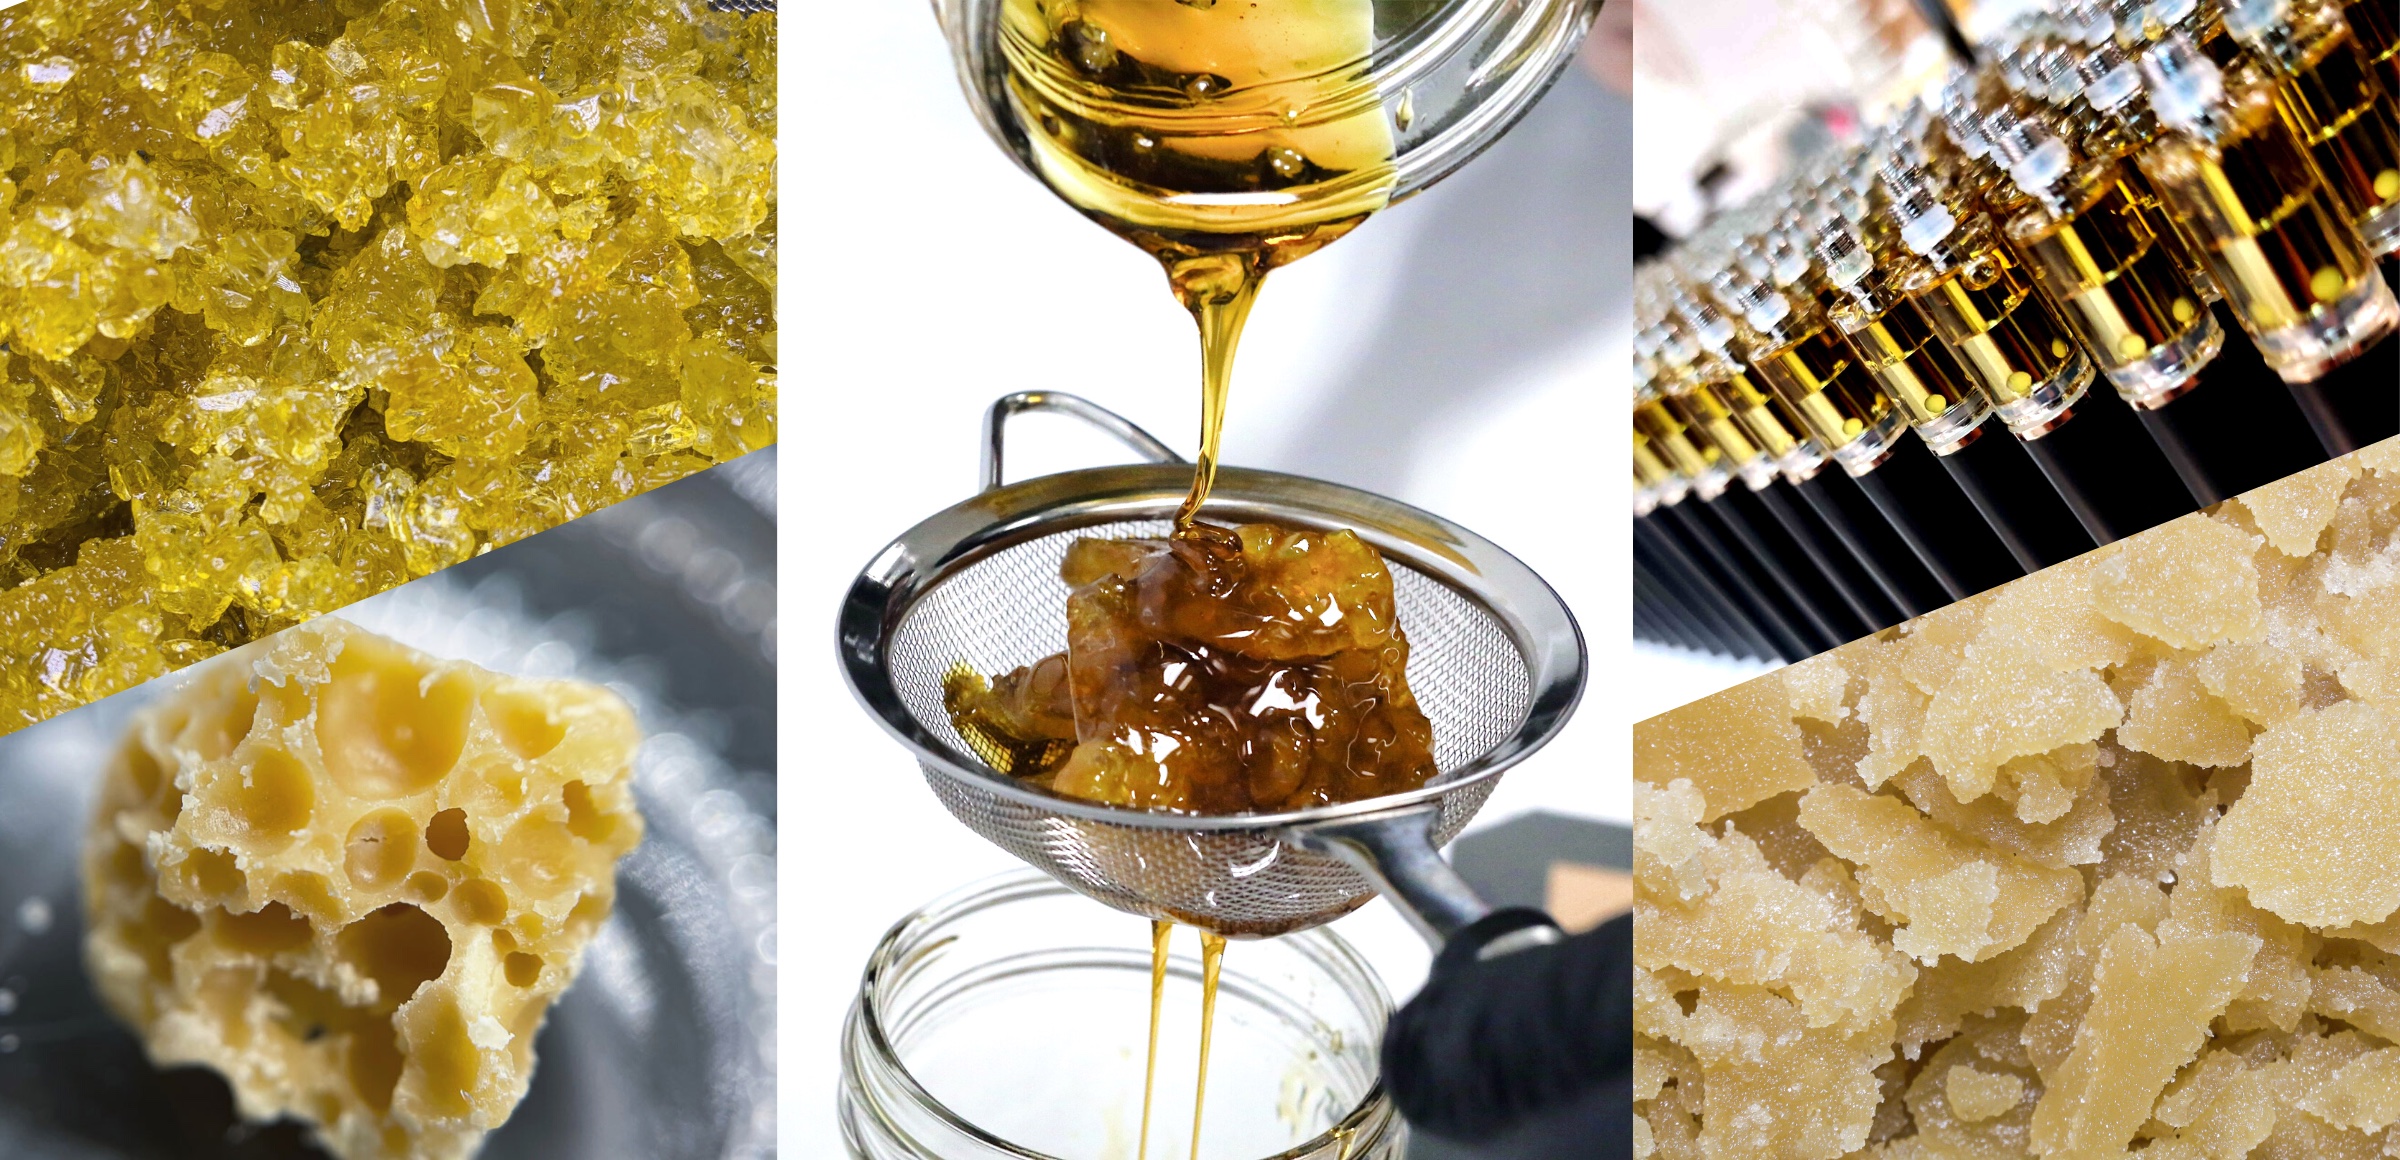 ama-concentrates-banners-1